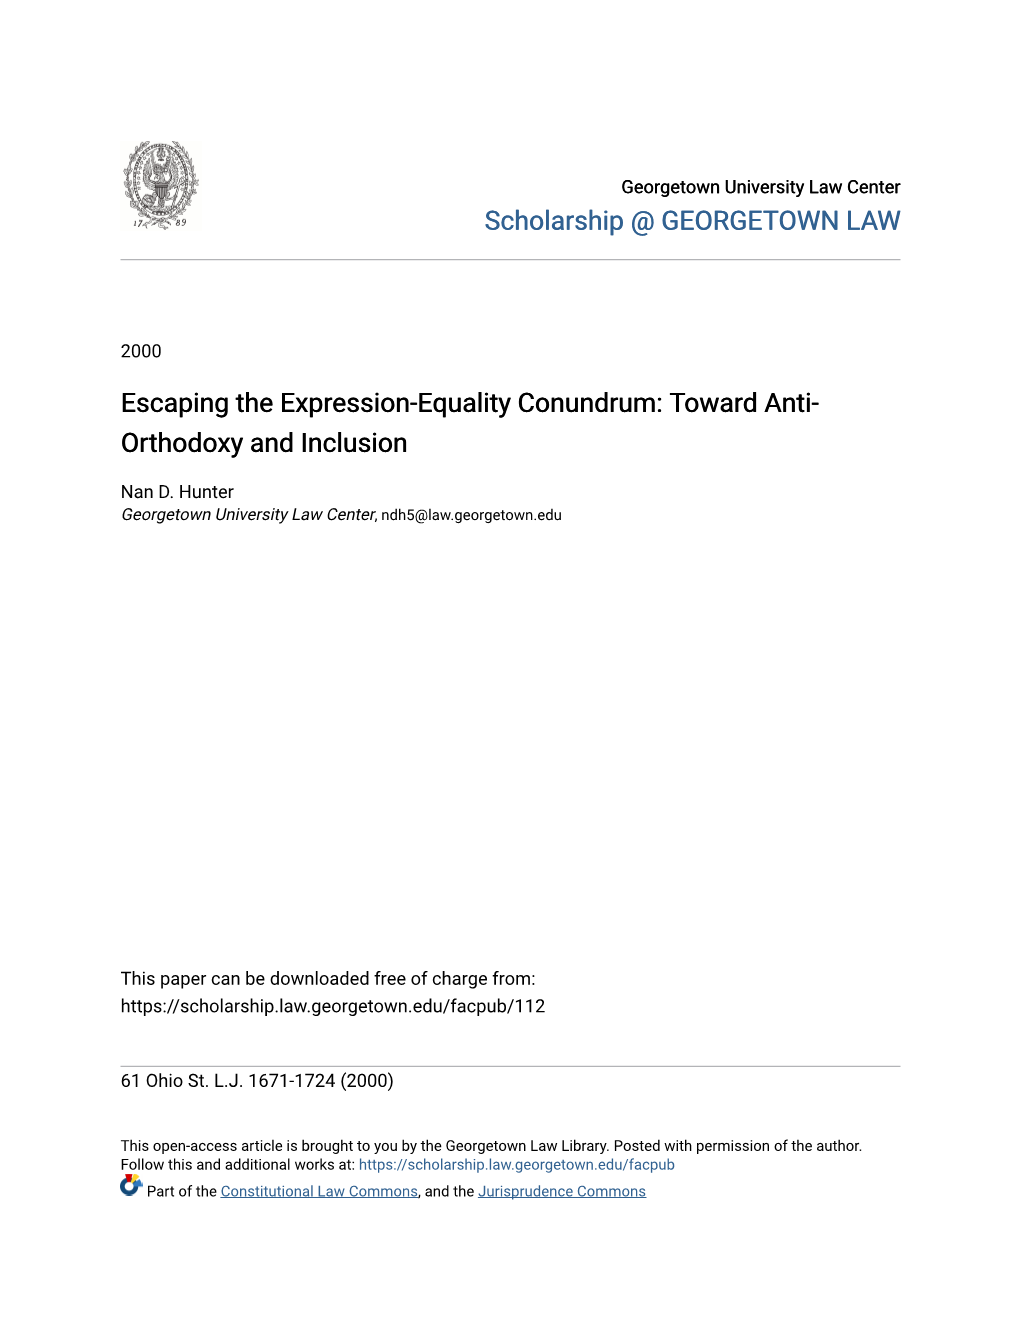 Escaping the Expression-Equality Conundrum: Toward Anti- Orthodoxy and Inclusion